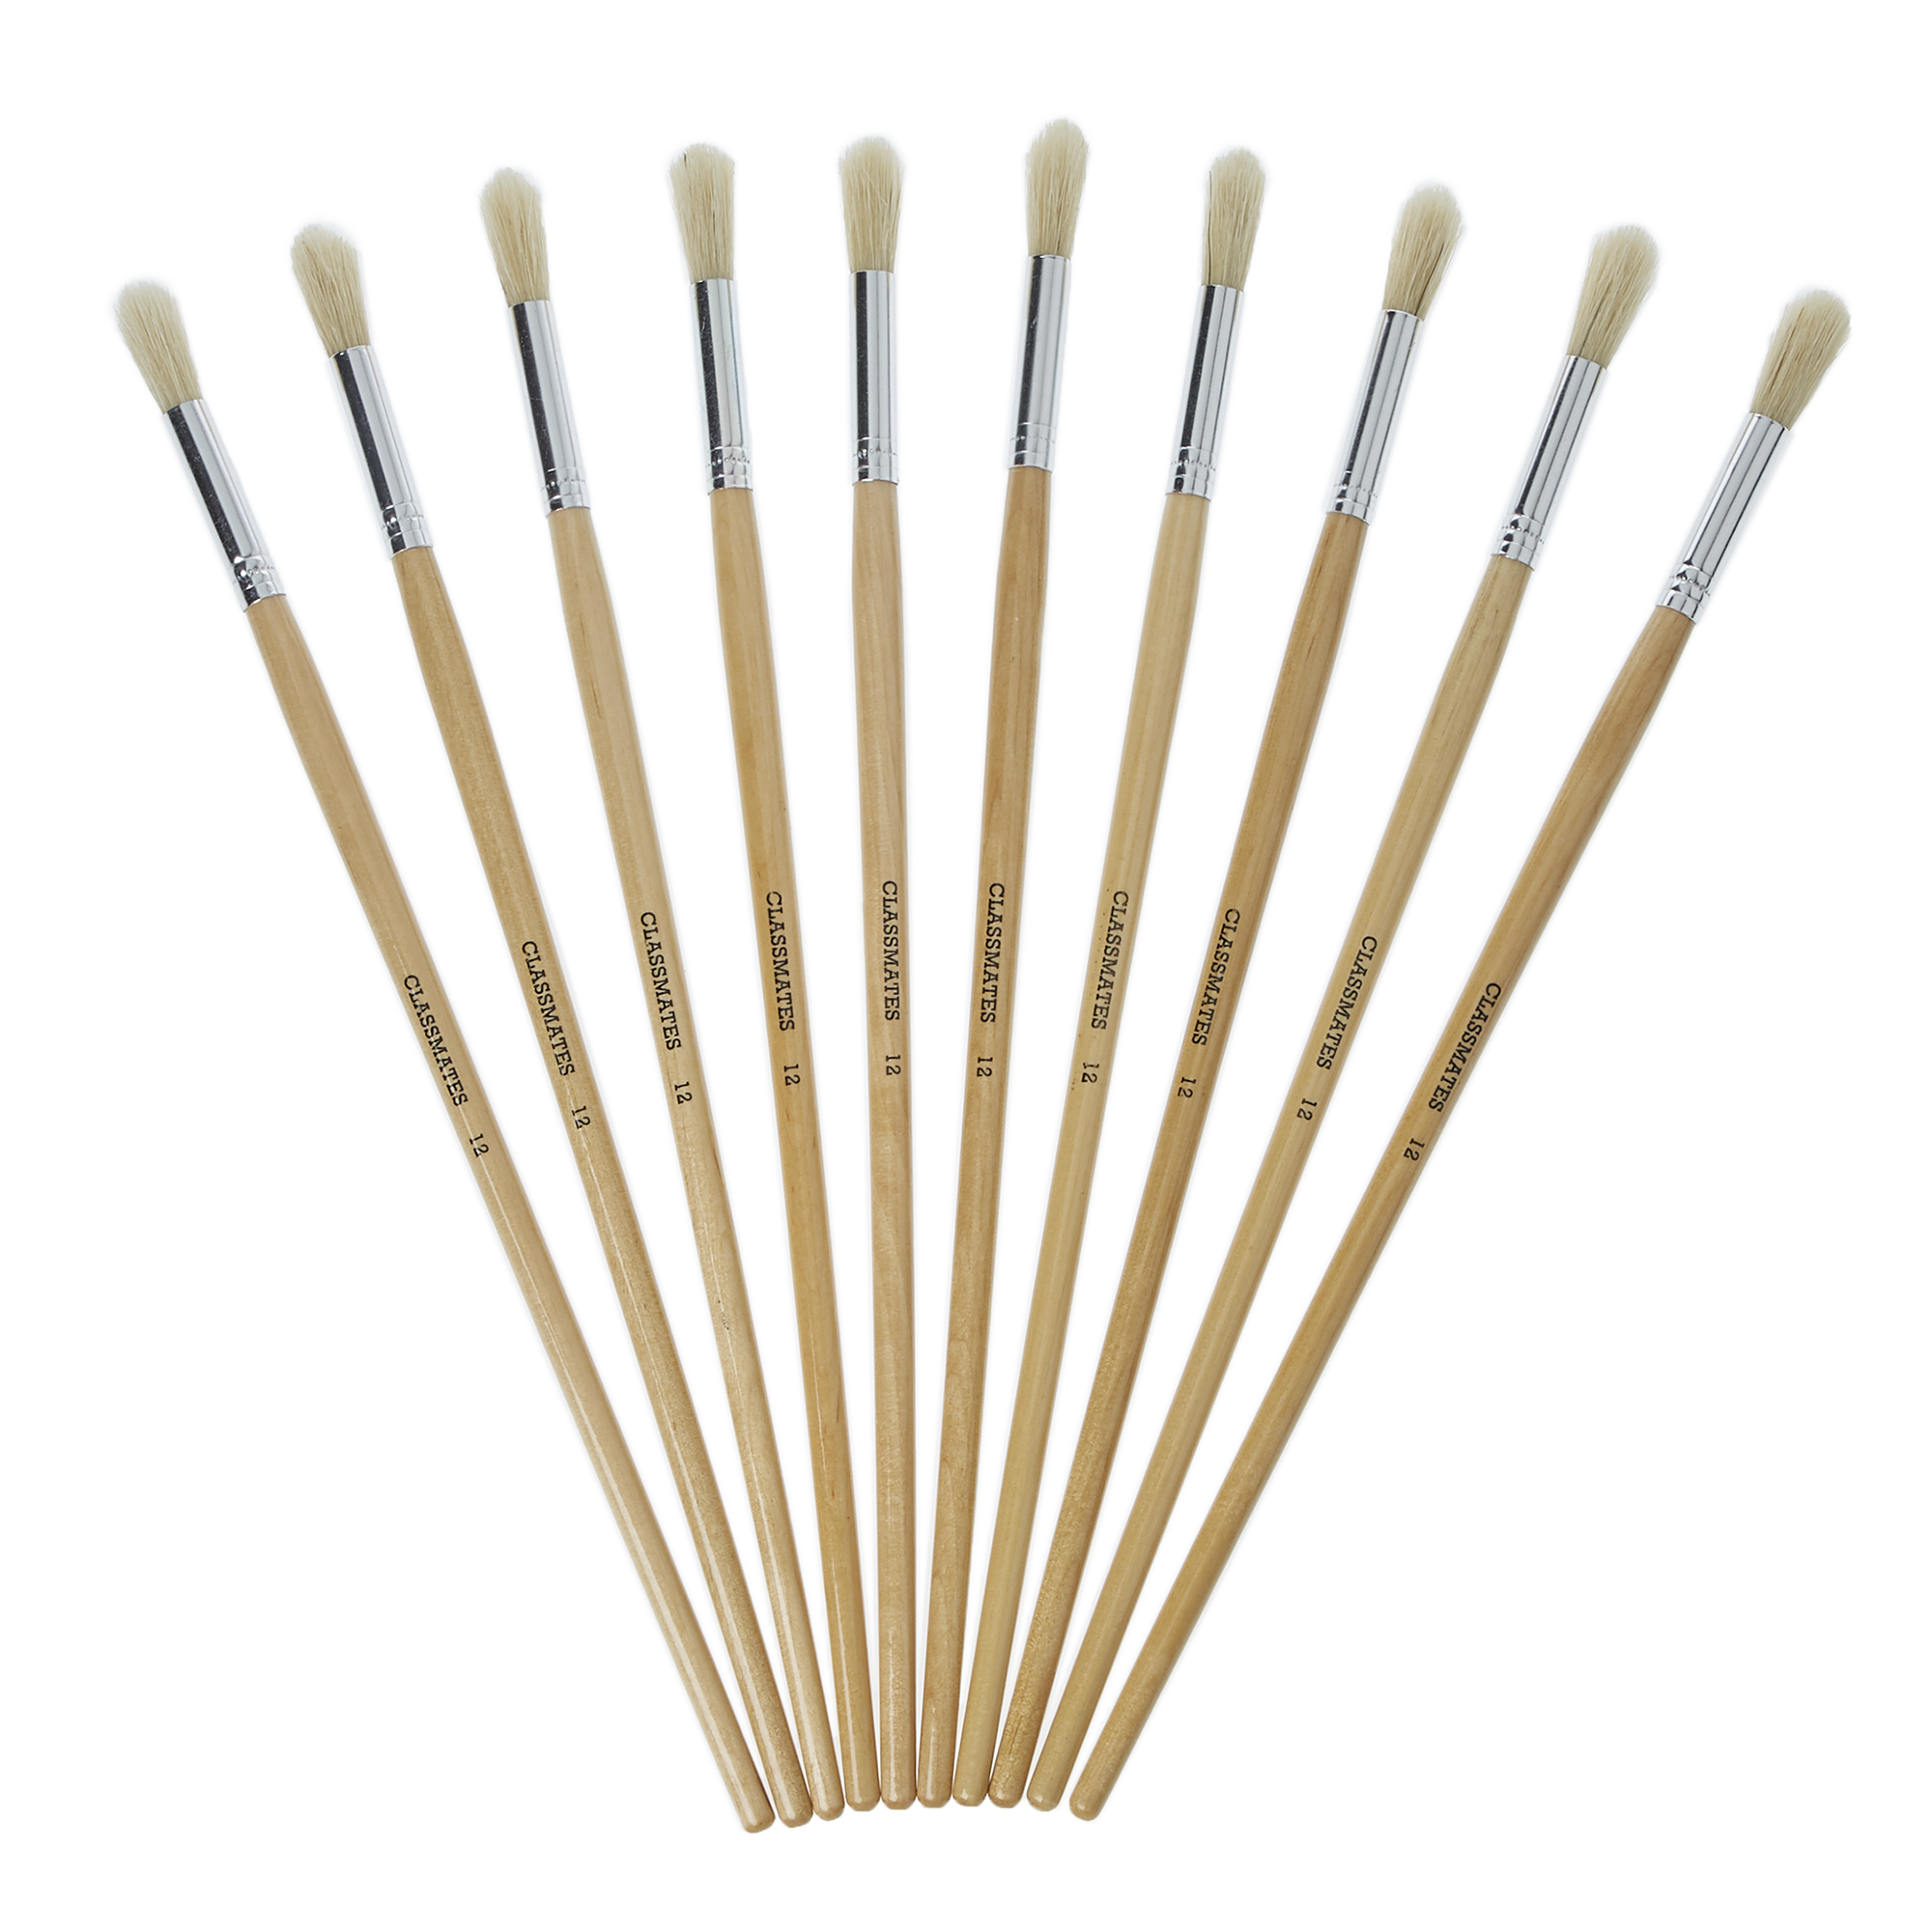 HE212062 - Classmates Long Round Paint Brushes - Size 12 - Pack of 10 ...